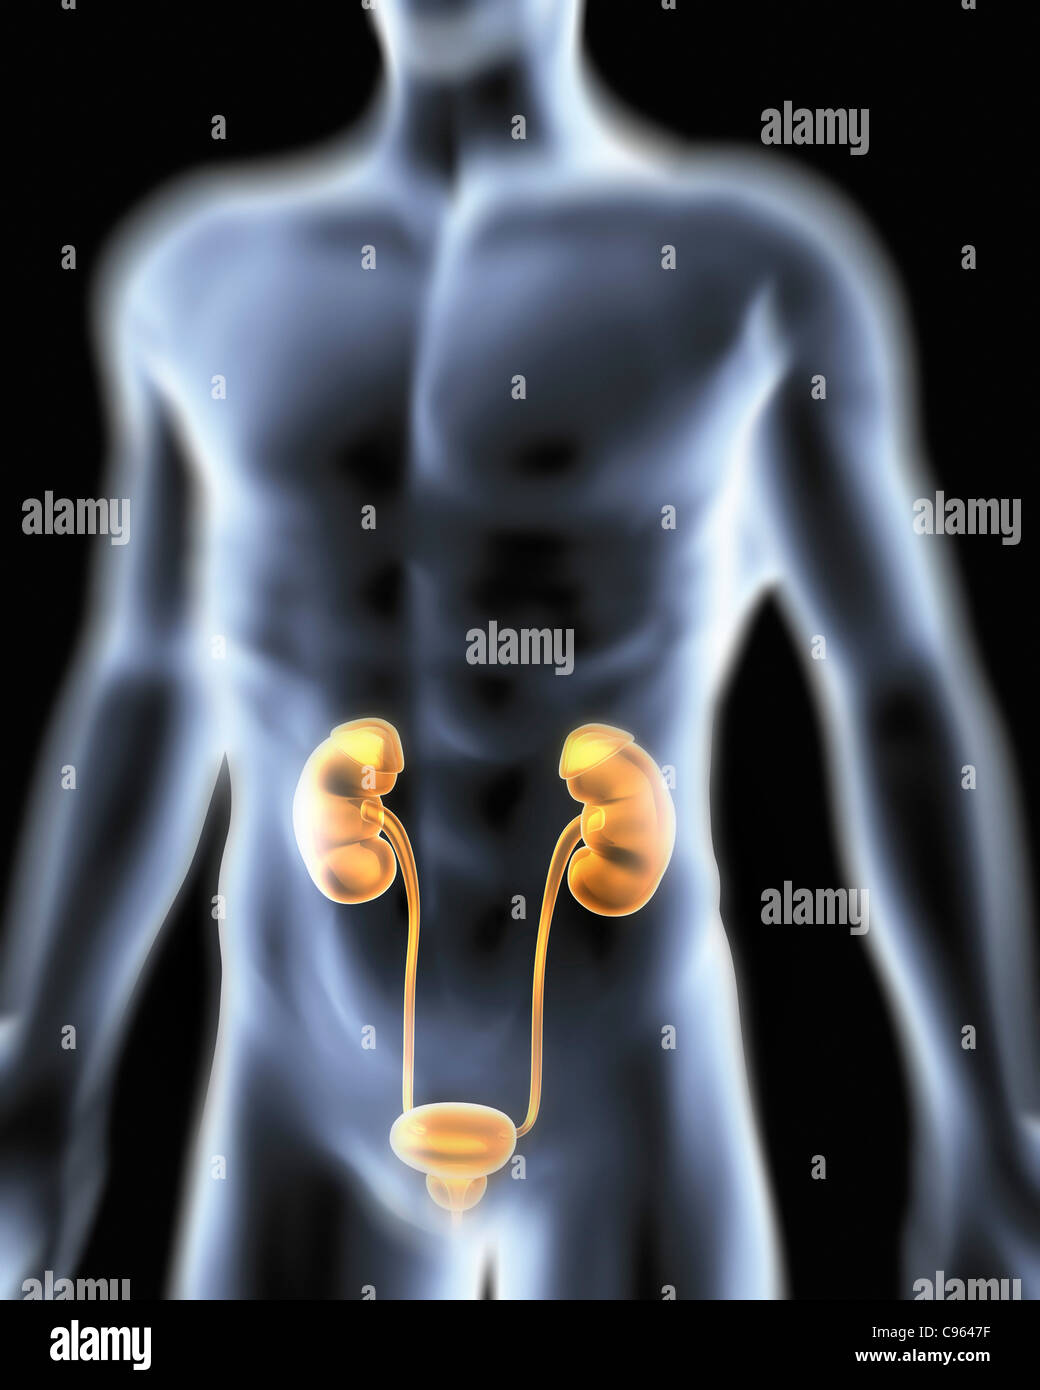 Urinary system. Computer artwork of a male torso and the urinary system showing kidney urethra bladder and suprarenal gland Stock Photo